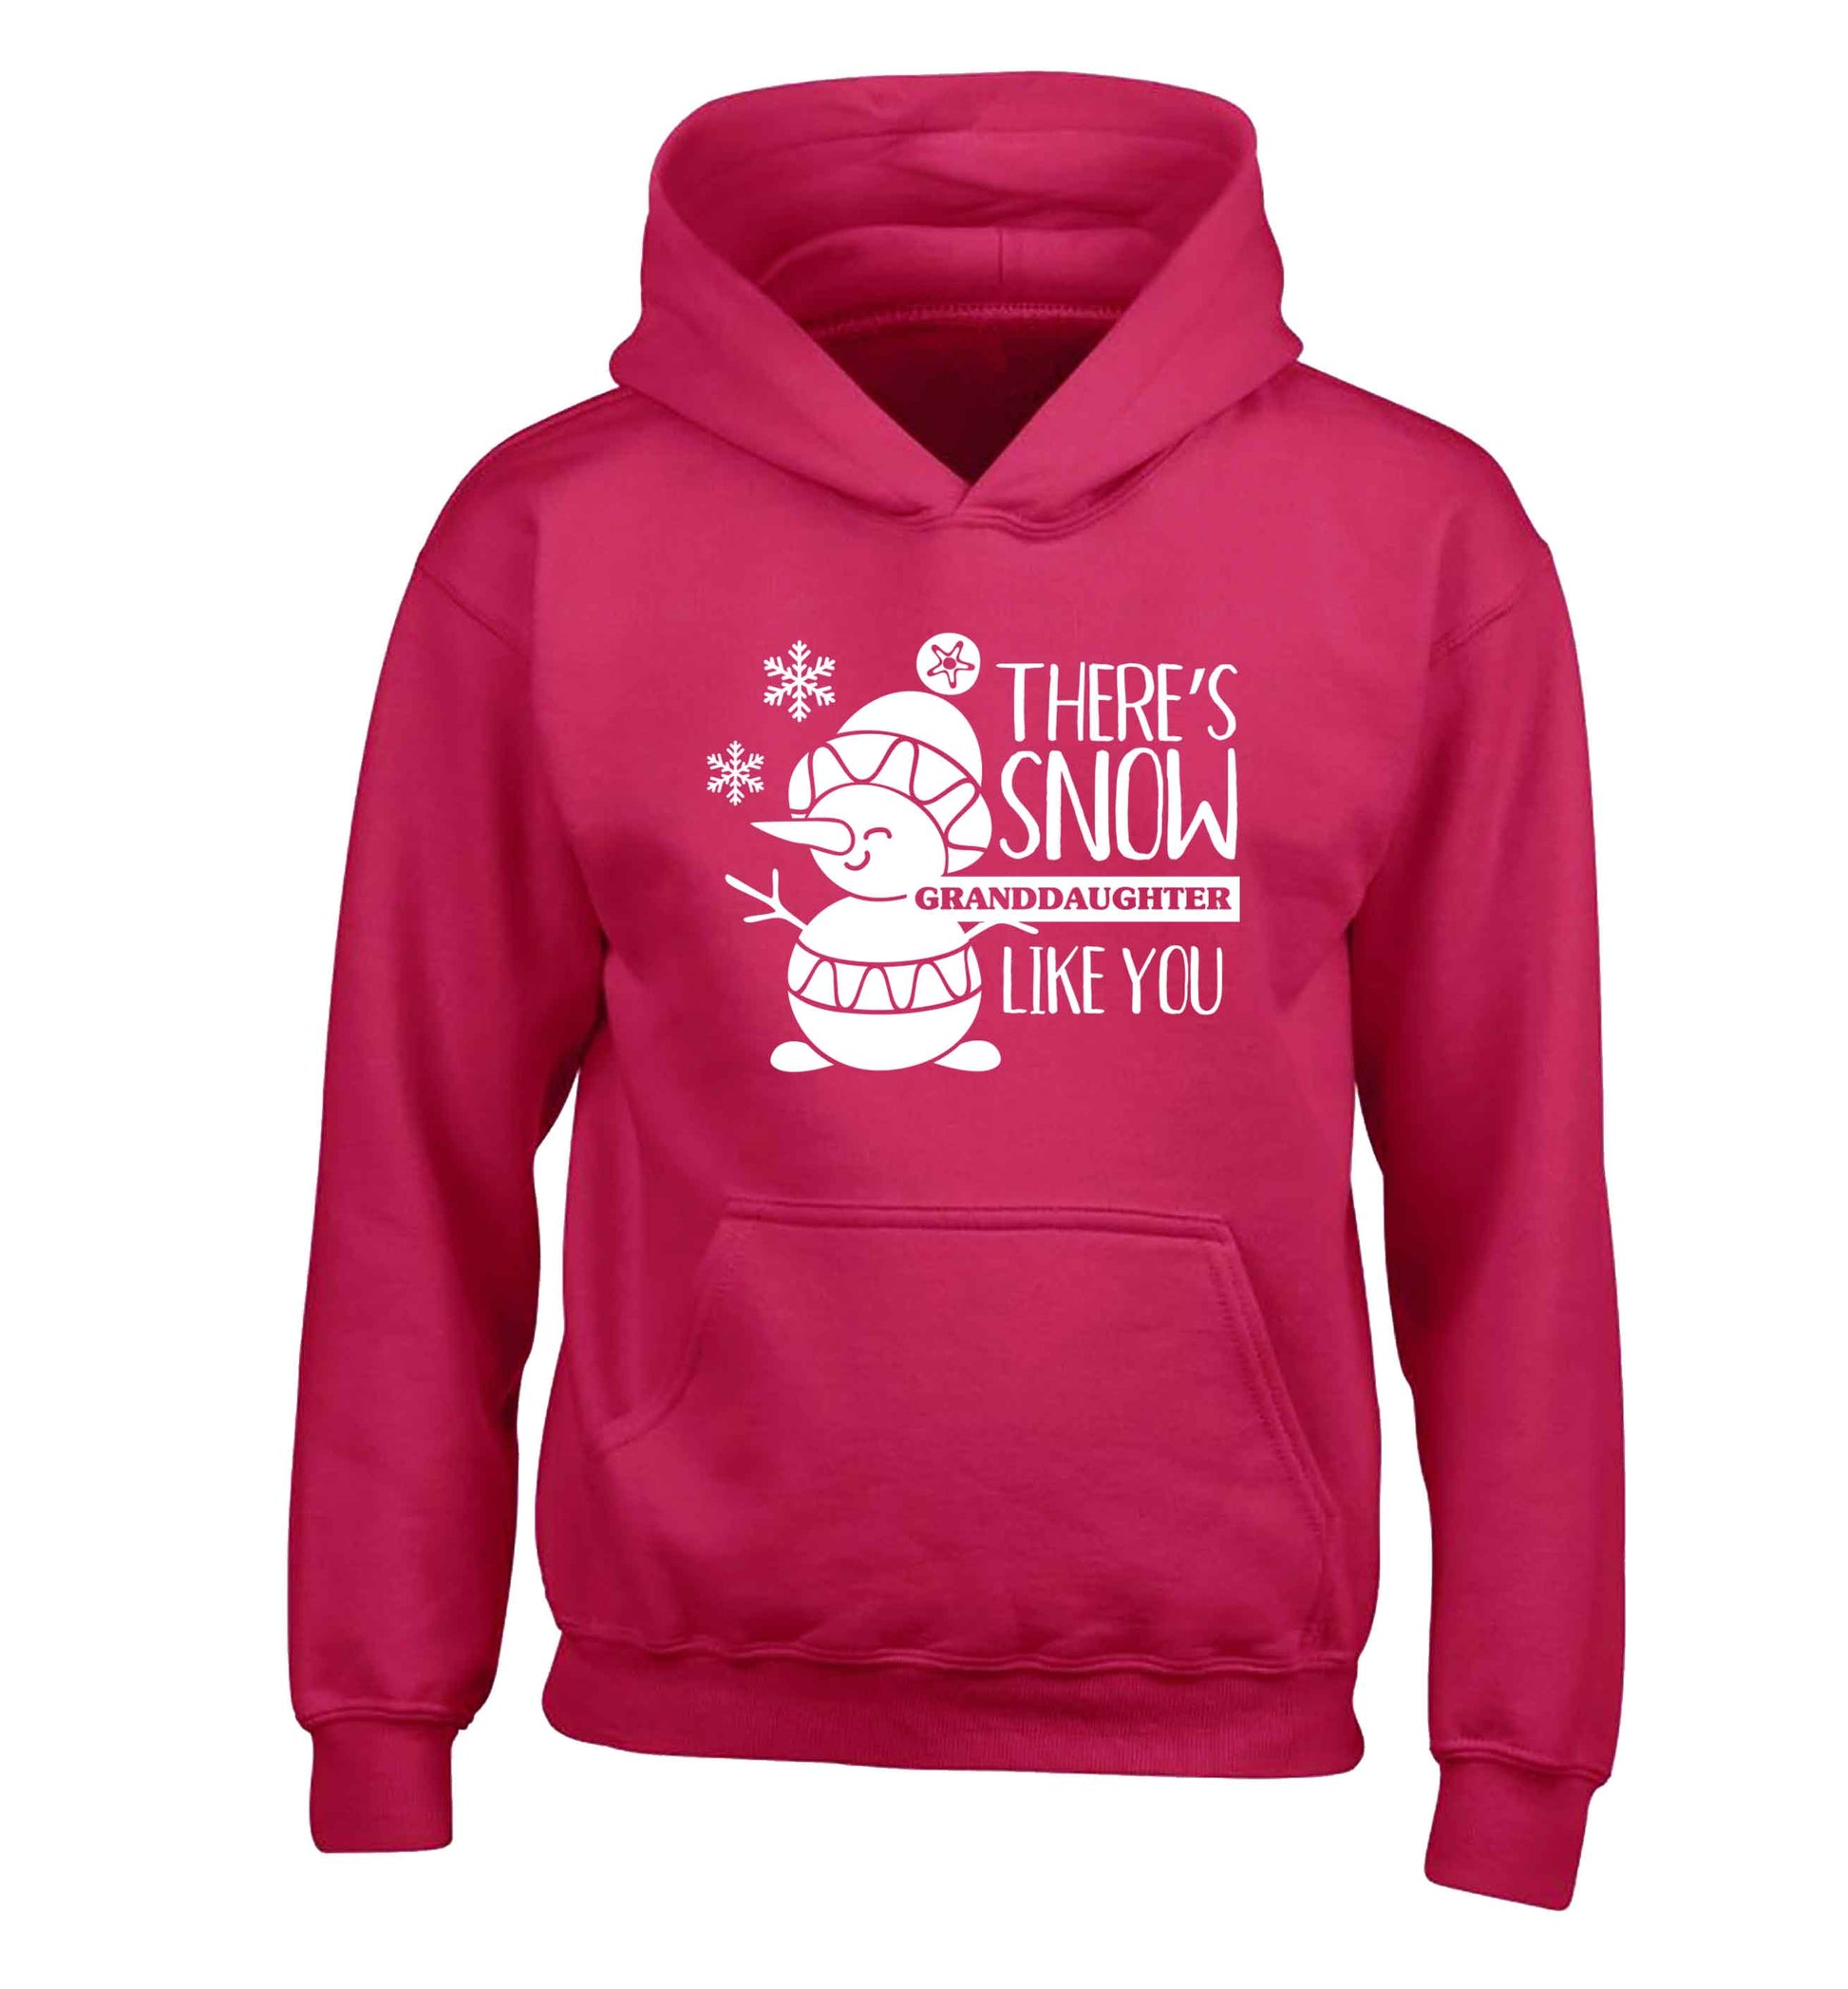 There's snow granddaughter like you children's pink hoodie 12-13 Years